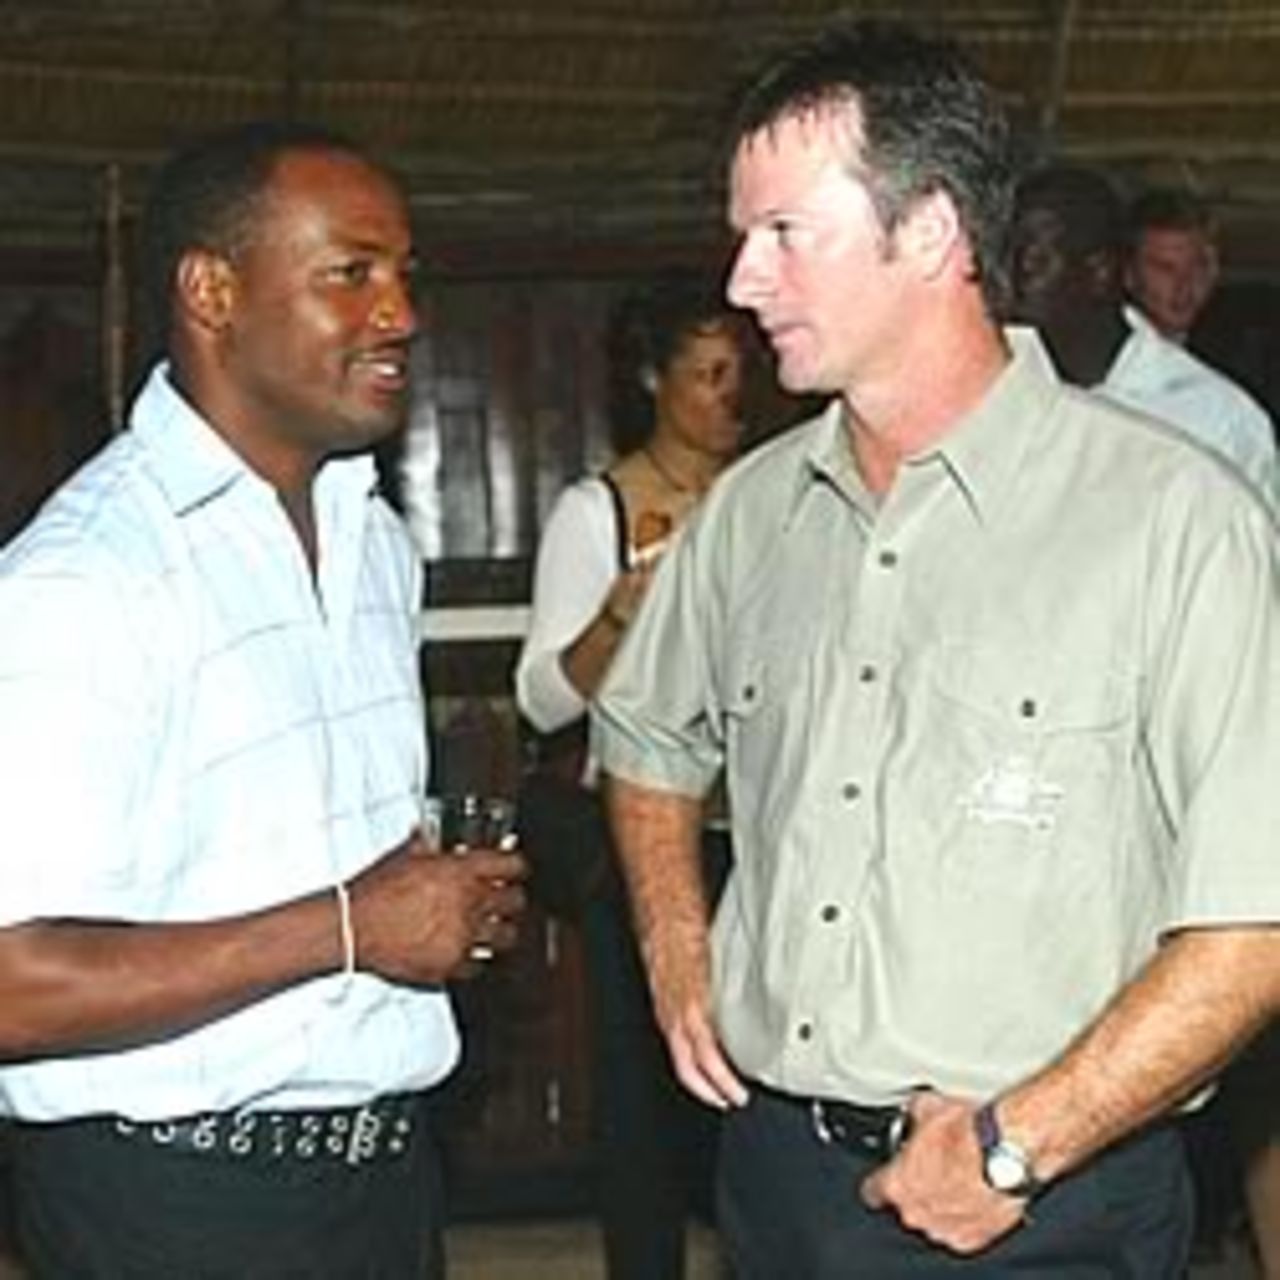 GEORGETOWN, Guyana - APRIL 8: Steve Waugh captain of Australia chats with Brian Lara captain of the West Indies during a cocktail function on April 8, 2003 at Le Meridien Pegasus Hotel, Georgetown, Guyana.